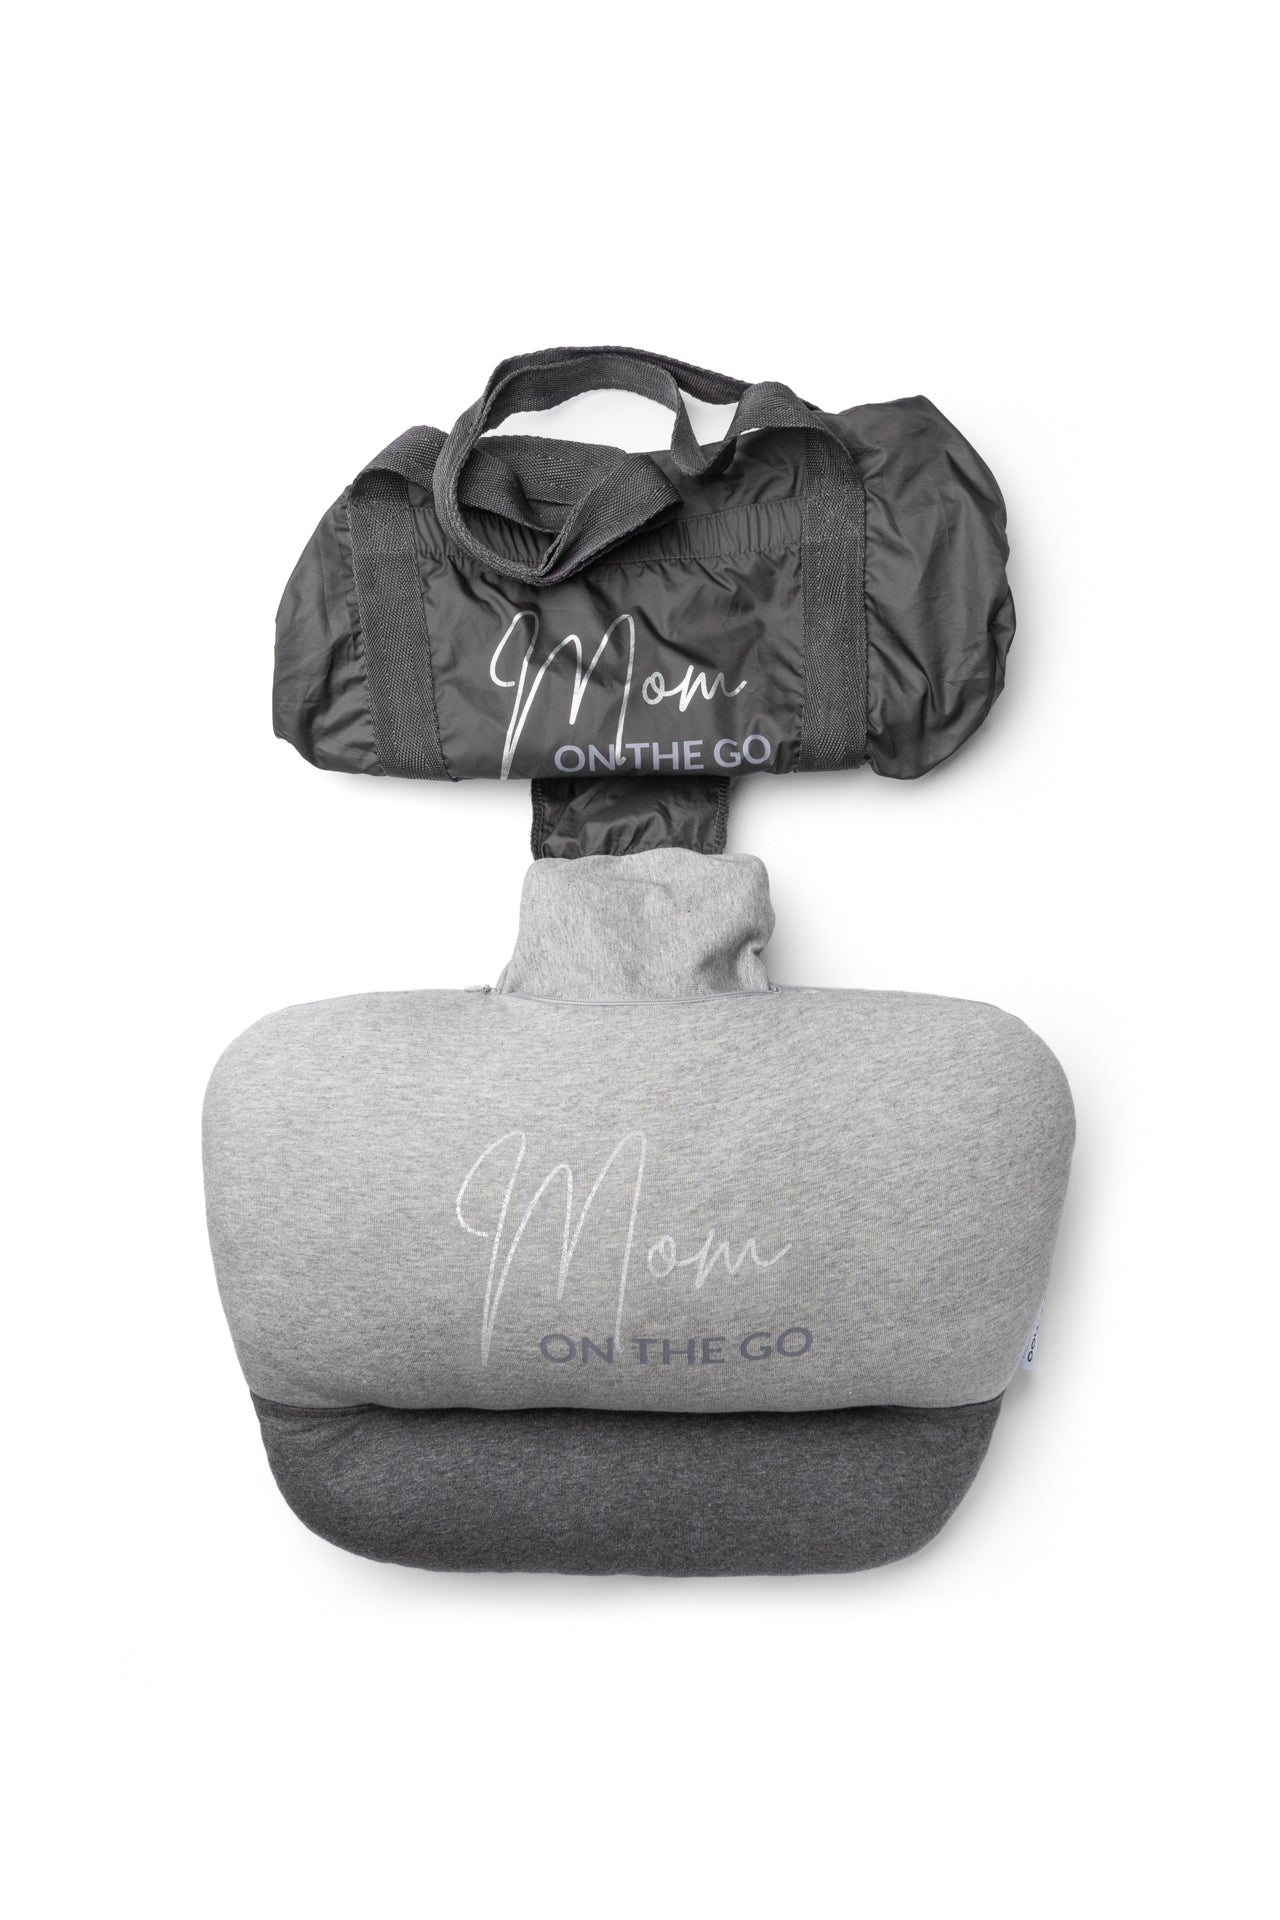 doomoo on the go pillow with foldable bag